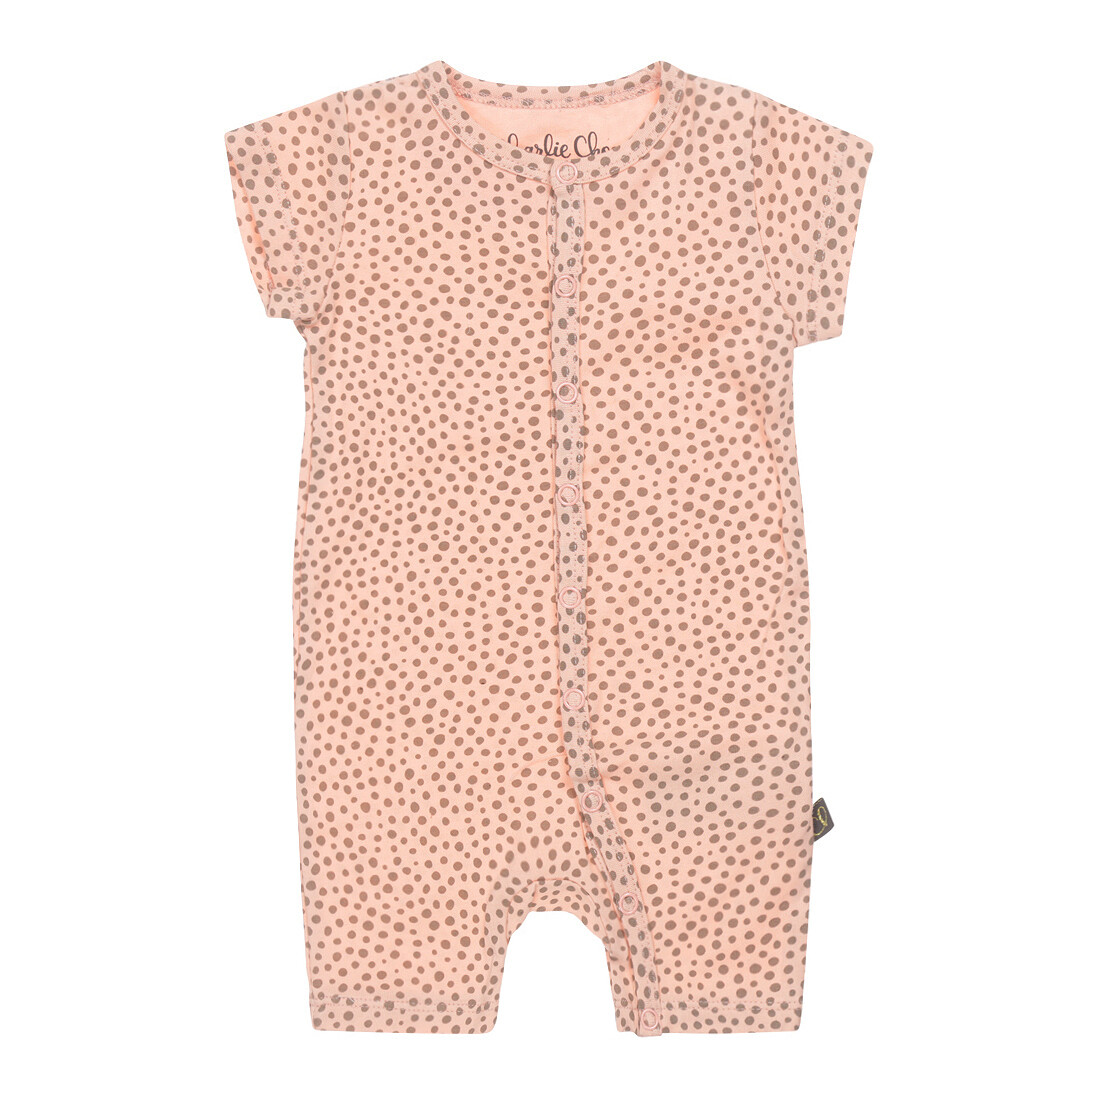 Baby jumpsuit T47008-41 Peach Charlie Choe Howdy